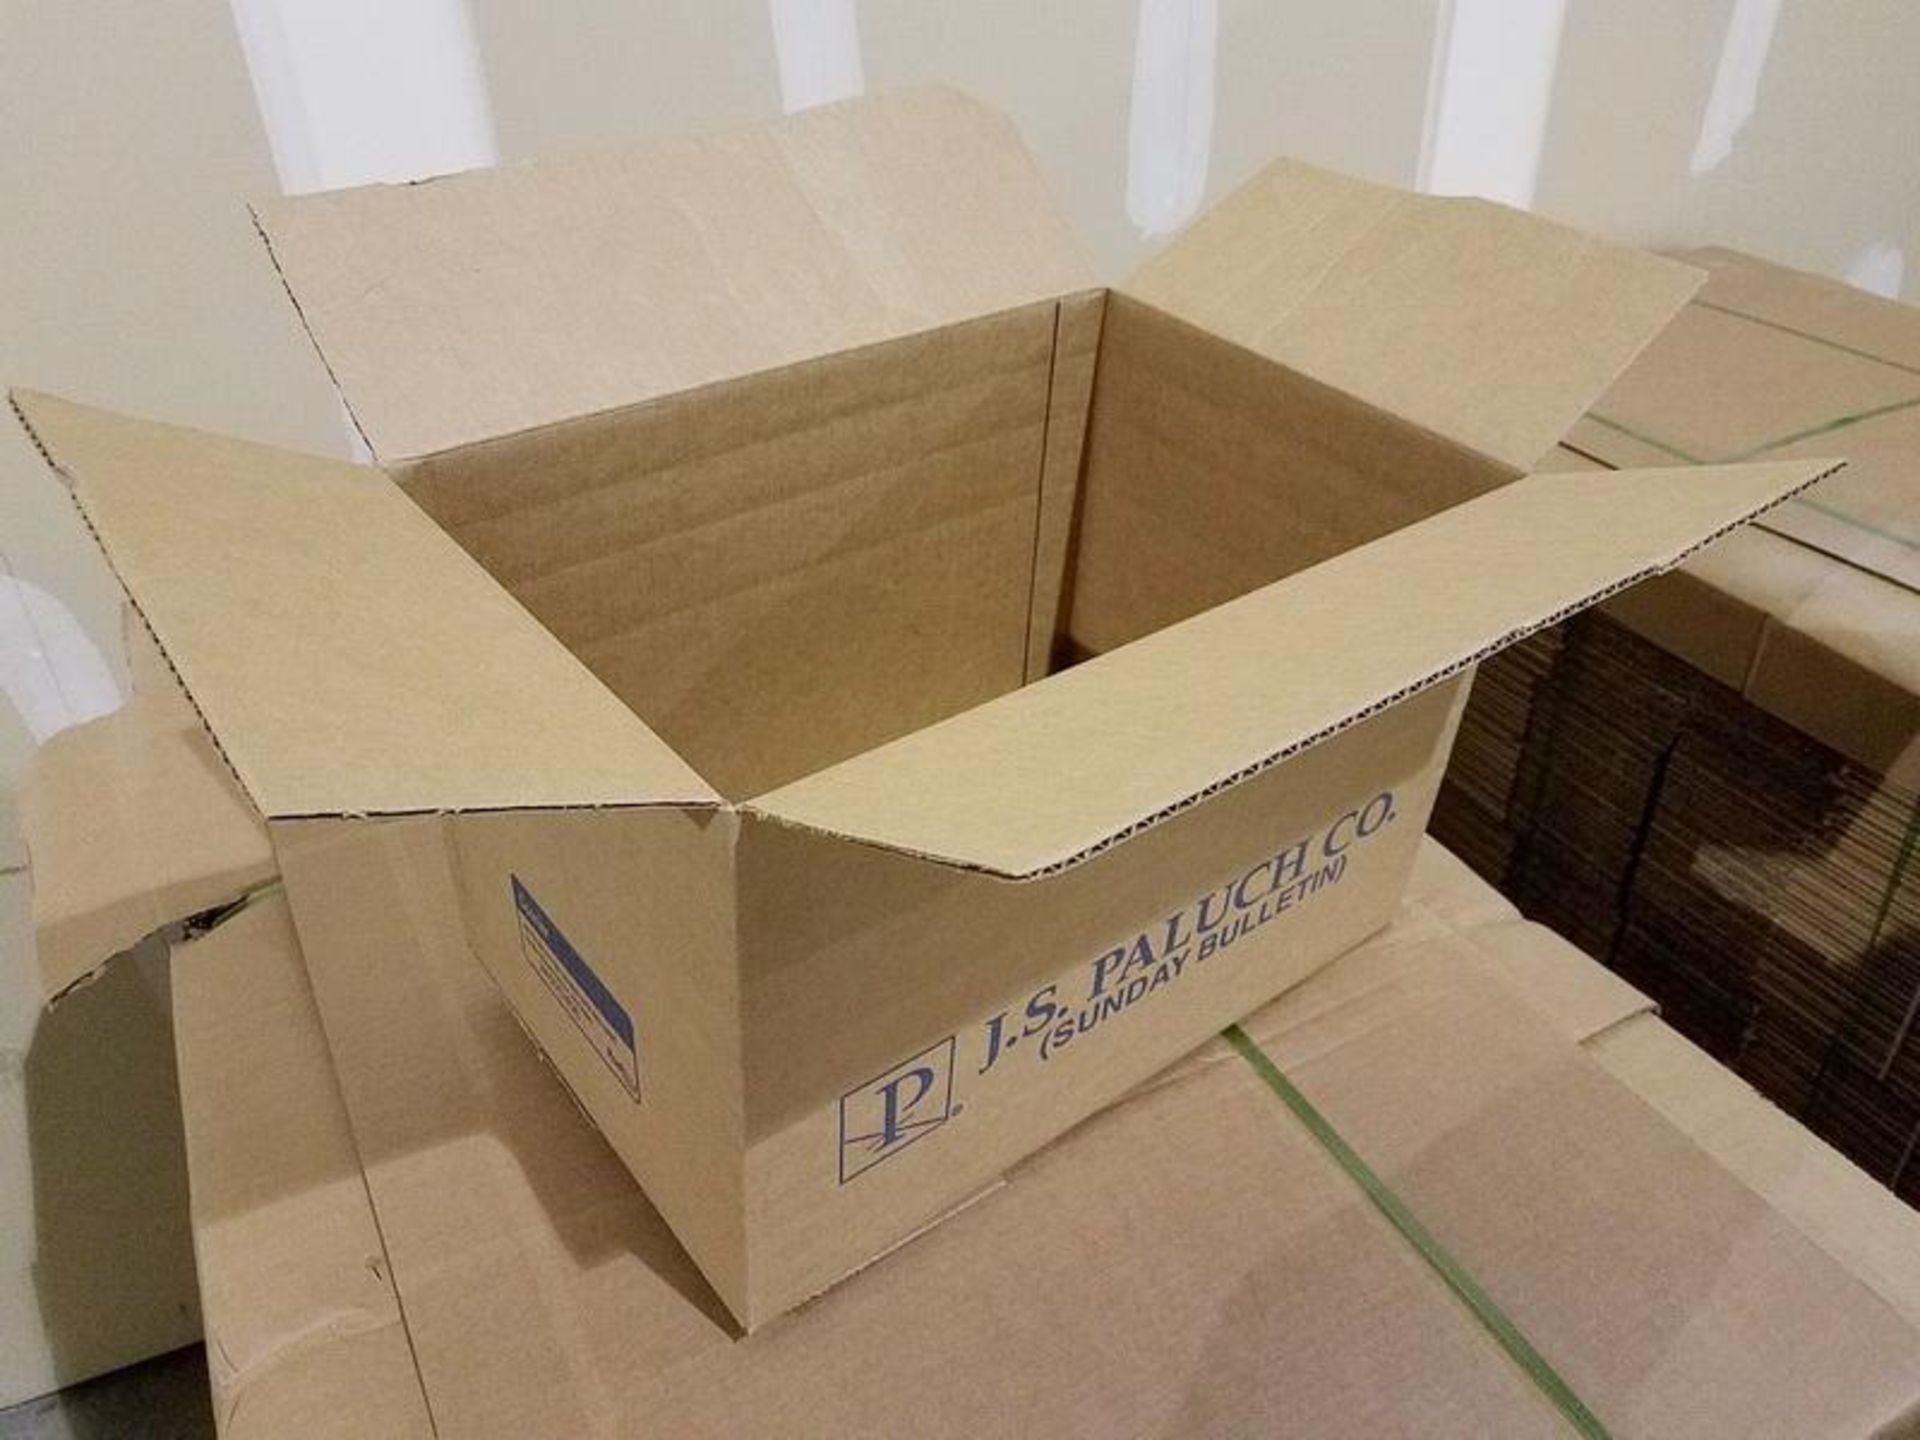 Lot JSP-JB9 R1 Corrugated Boxes, 17.25" x 11.5" x 11.5" Approx. - Image 3 of 3